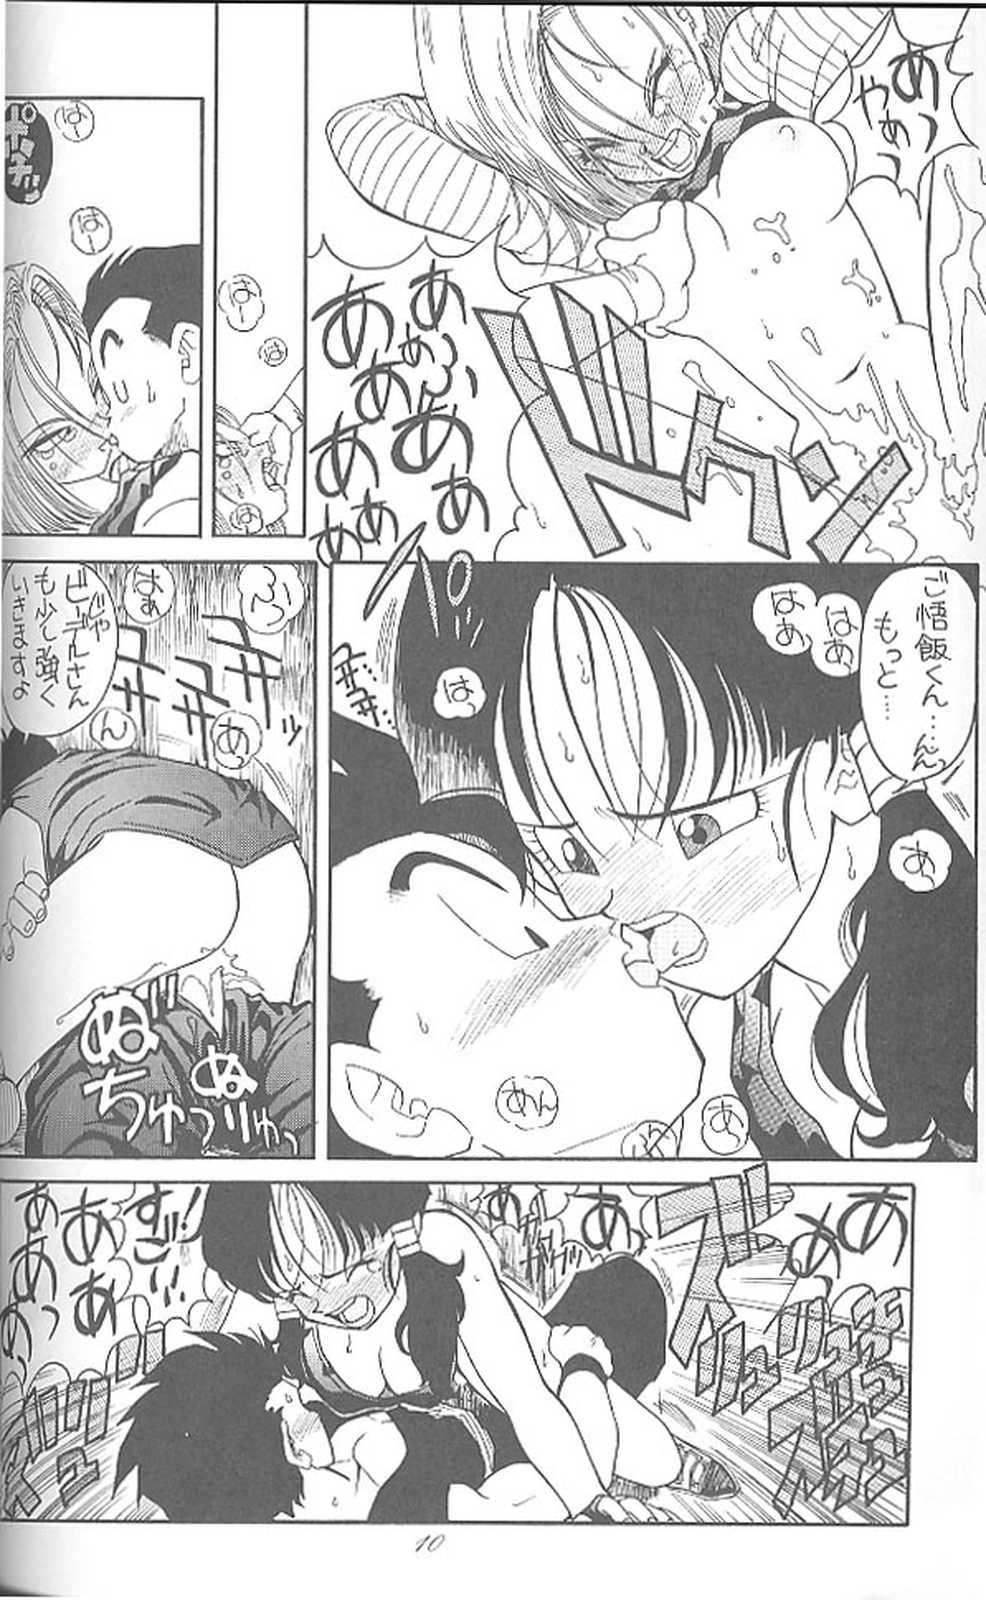 Gapes Gaping Asshole Haraharatokei vol.4 - Dragon ball z Slayers Dirty pair Ghost sweeper mikami World masterpiece theater Dr. slump Tico of the seven seas Suck Cock - Page 9